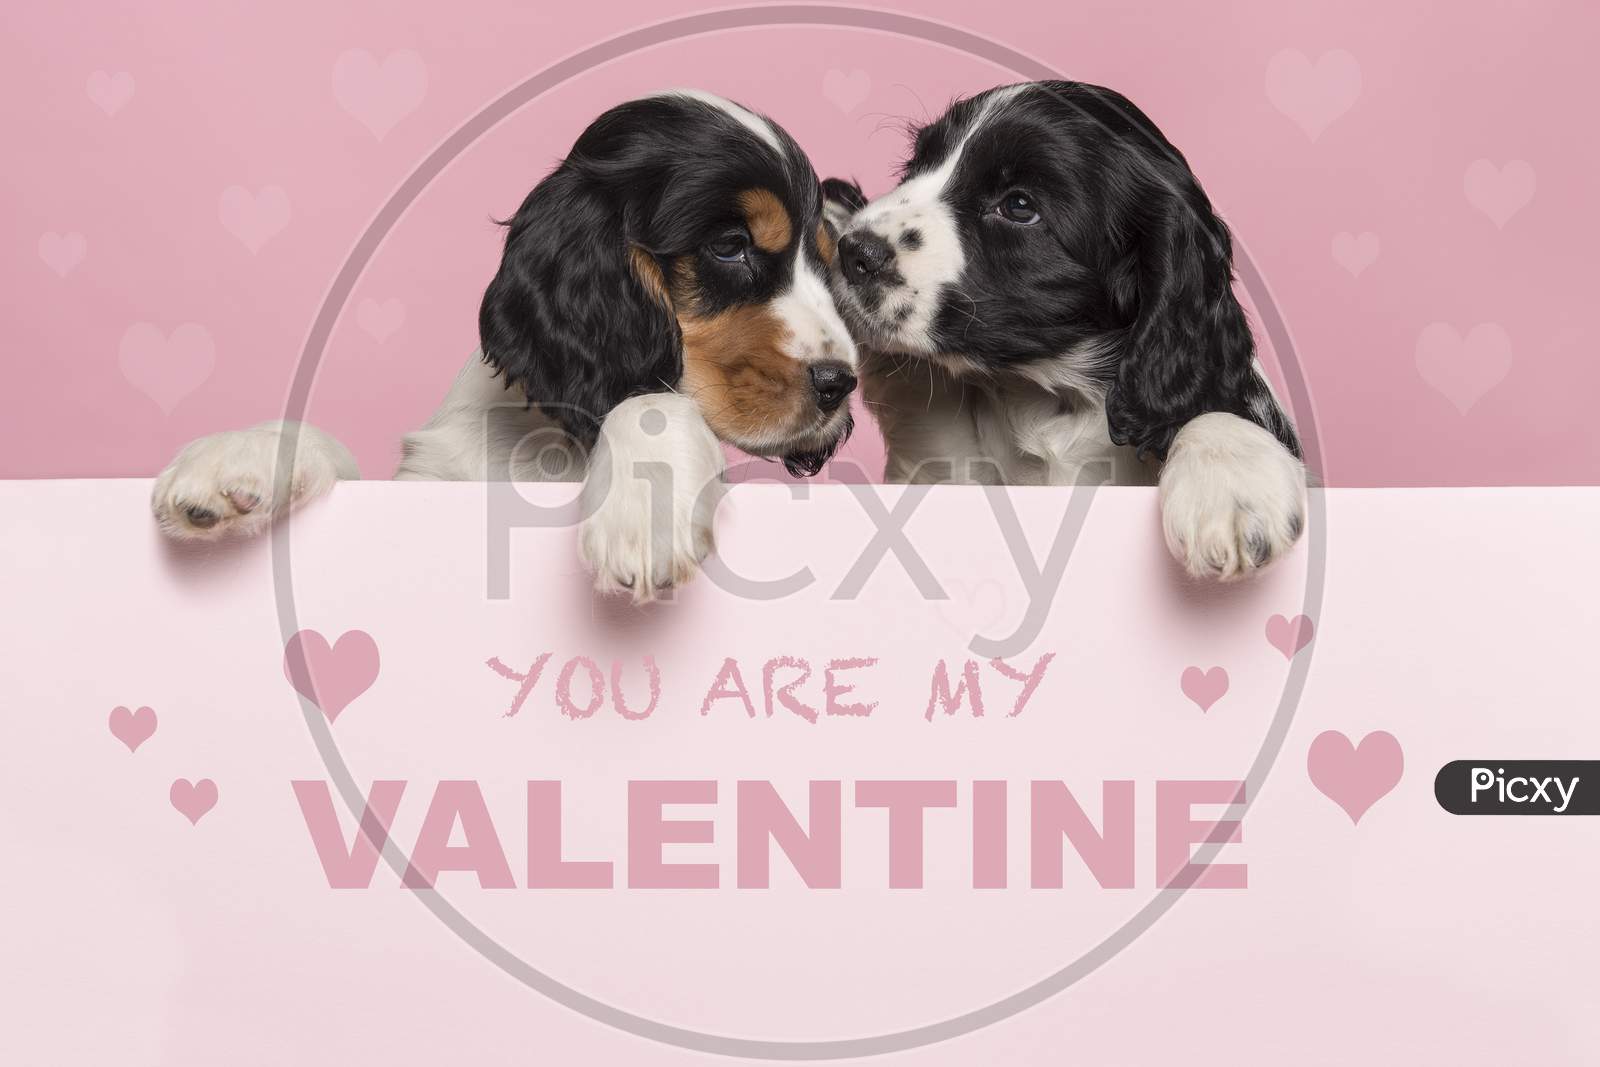 Valentine’S Day Greeting Card With Two Cuddling Cocker Spaniel Puppies Hanging Over The Border Of A Pastel Pink Board With Text You Ar My Valentine